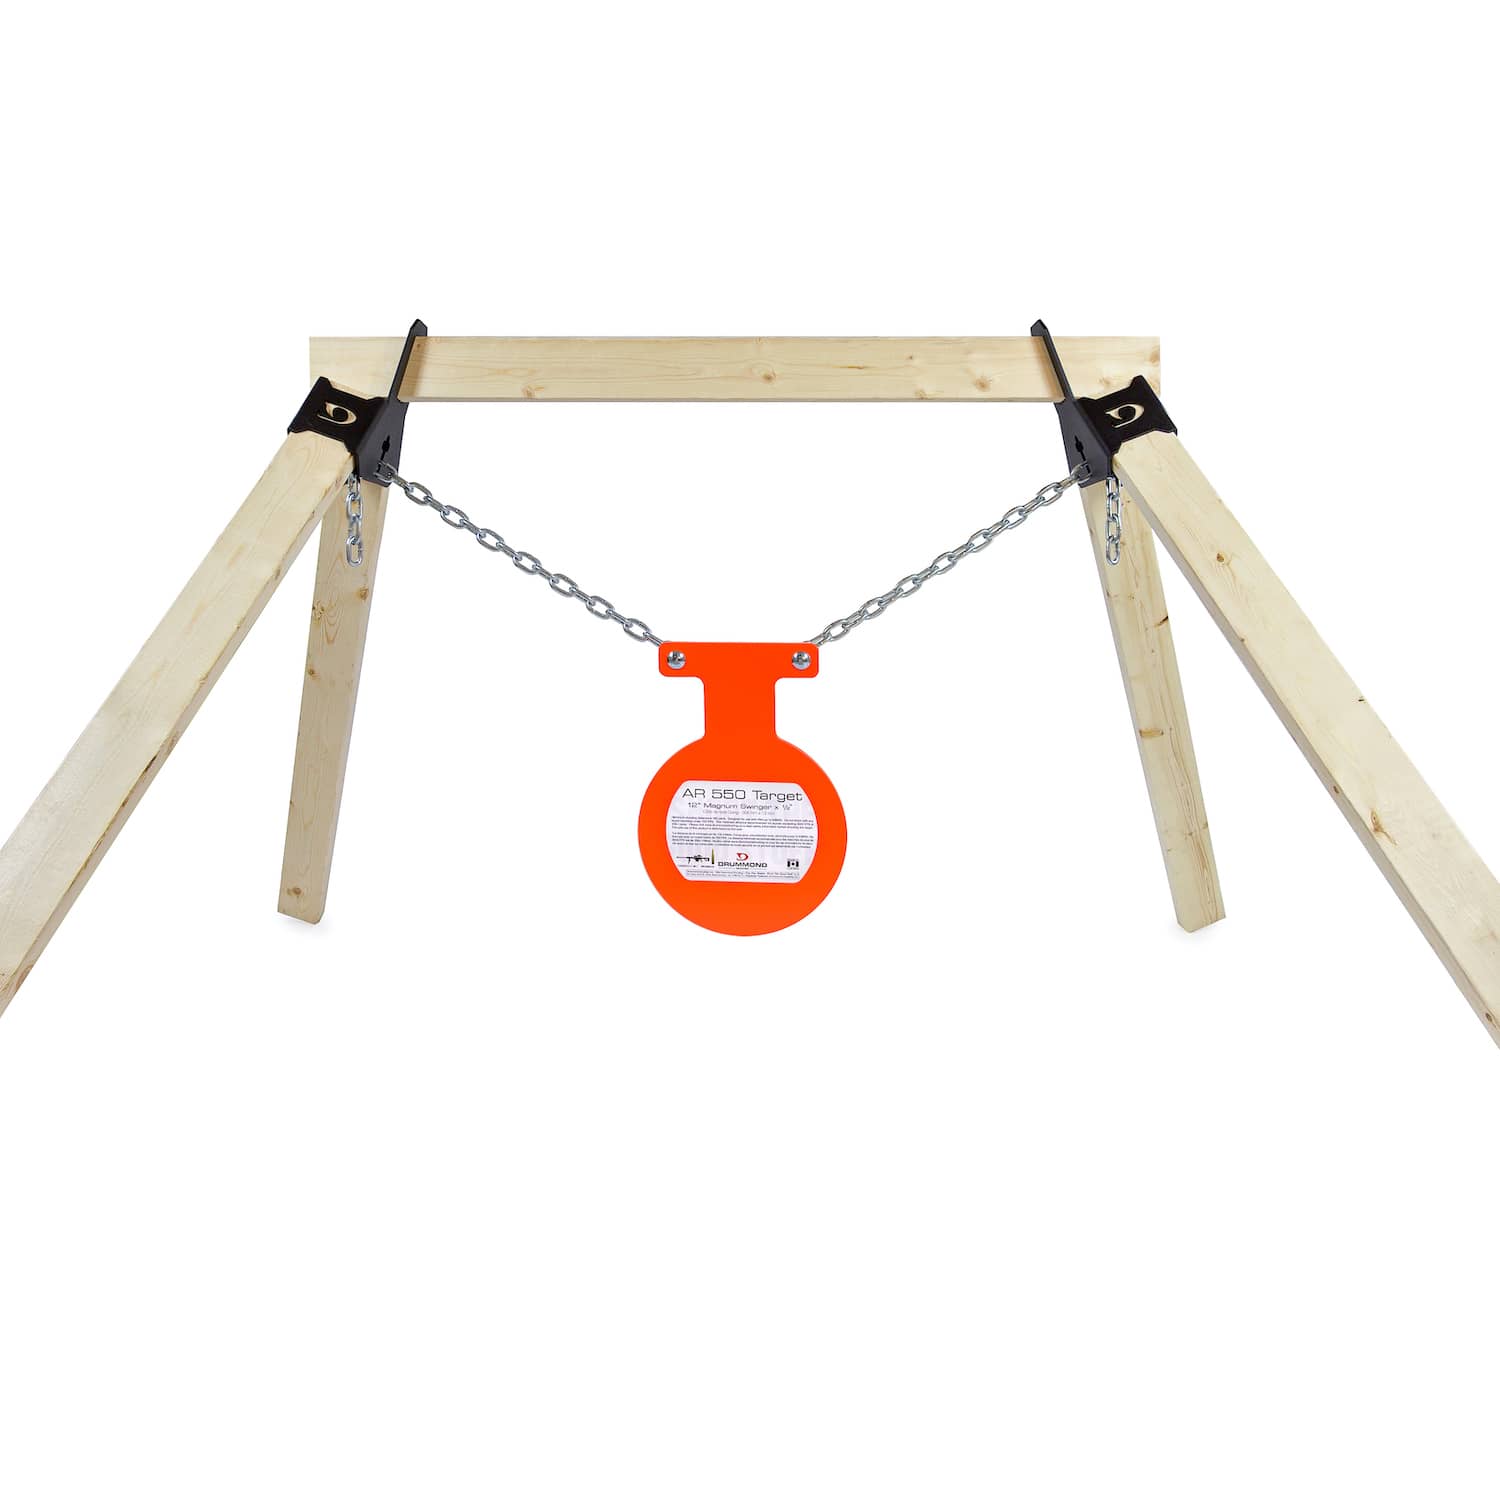 Use with 2x2 Wood Adjustable Height and Width Drummond Shooting Steel Target Stand Brackets Sawhorse Style